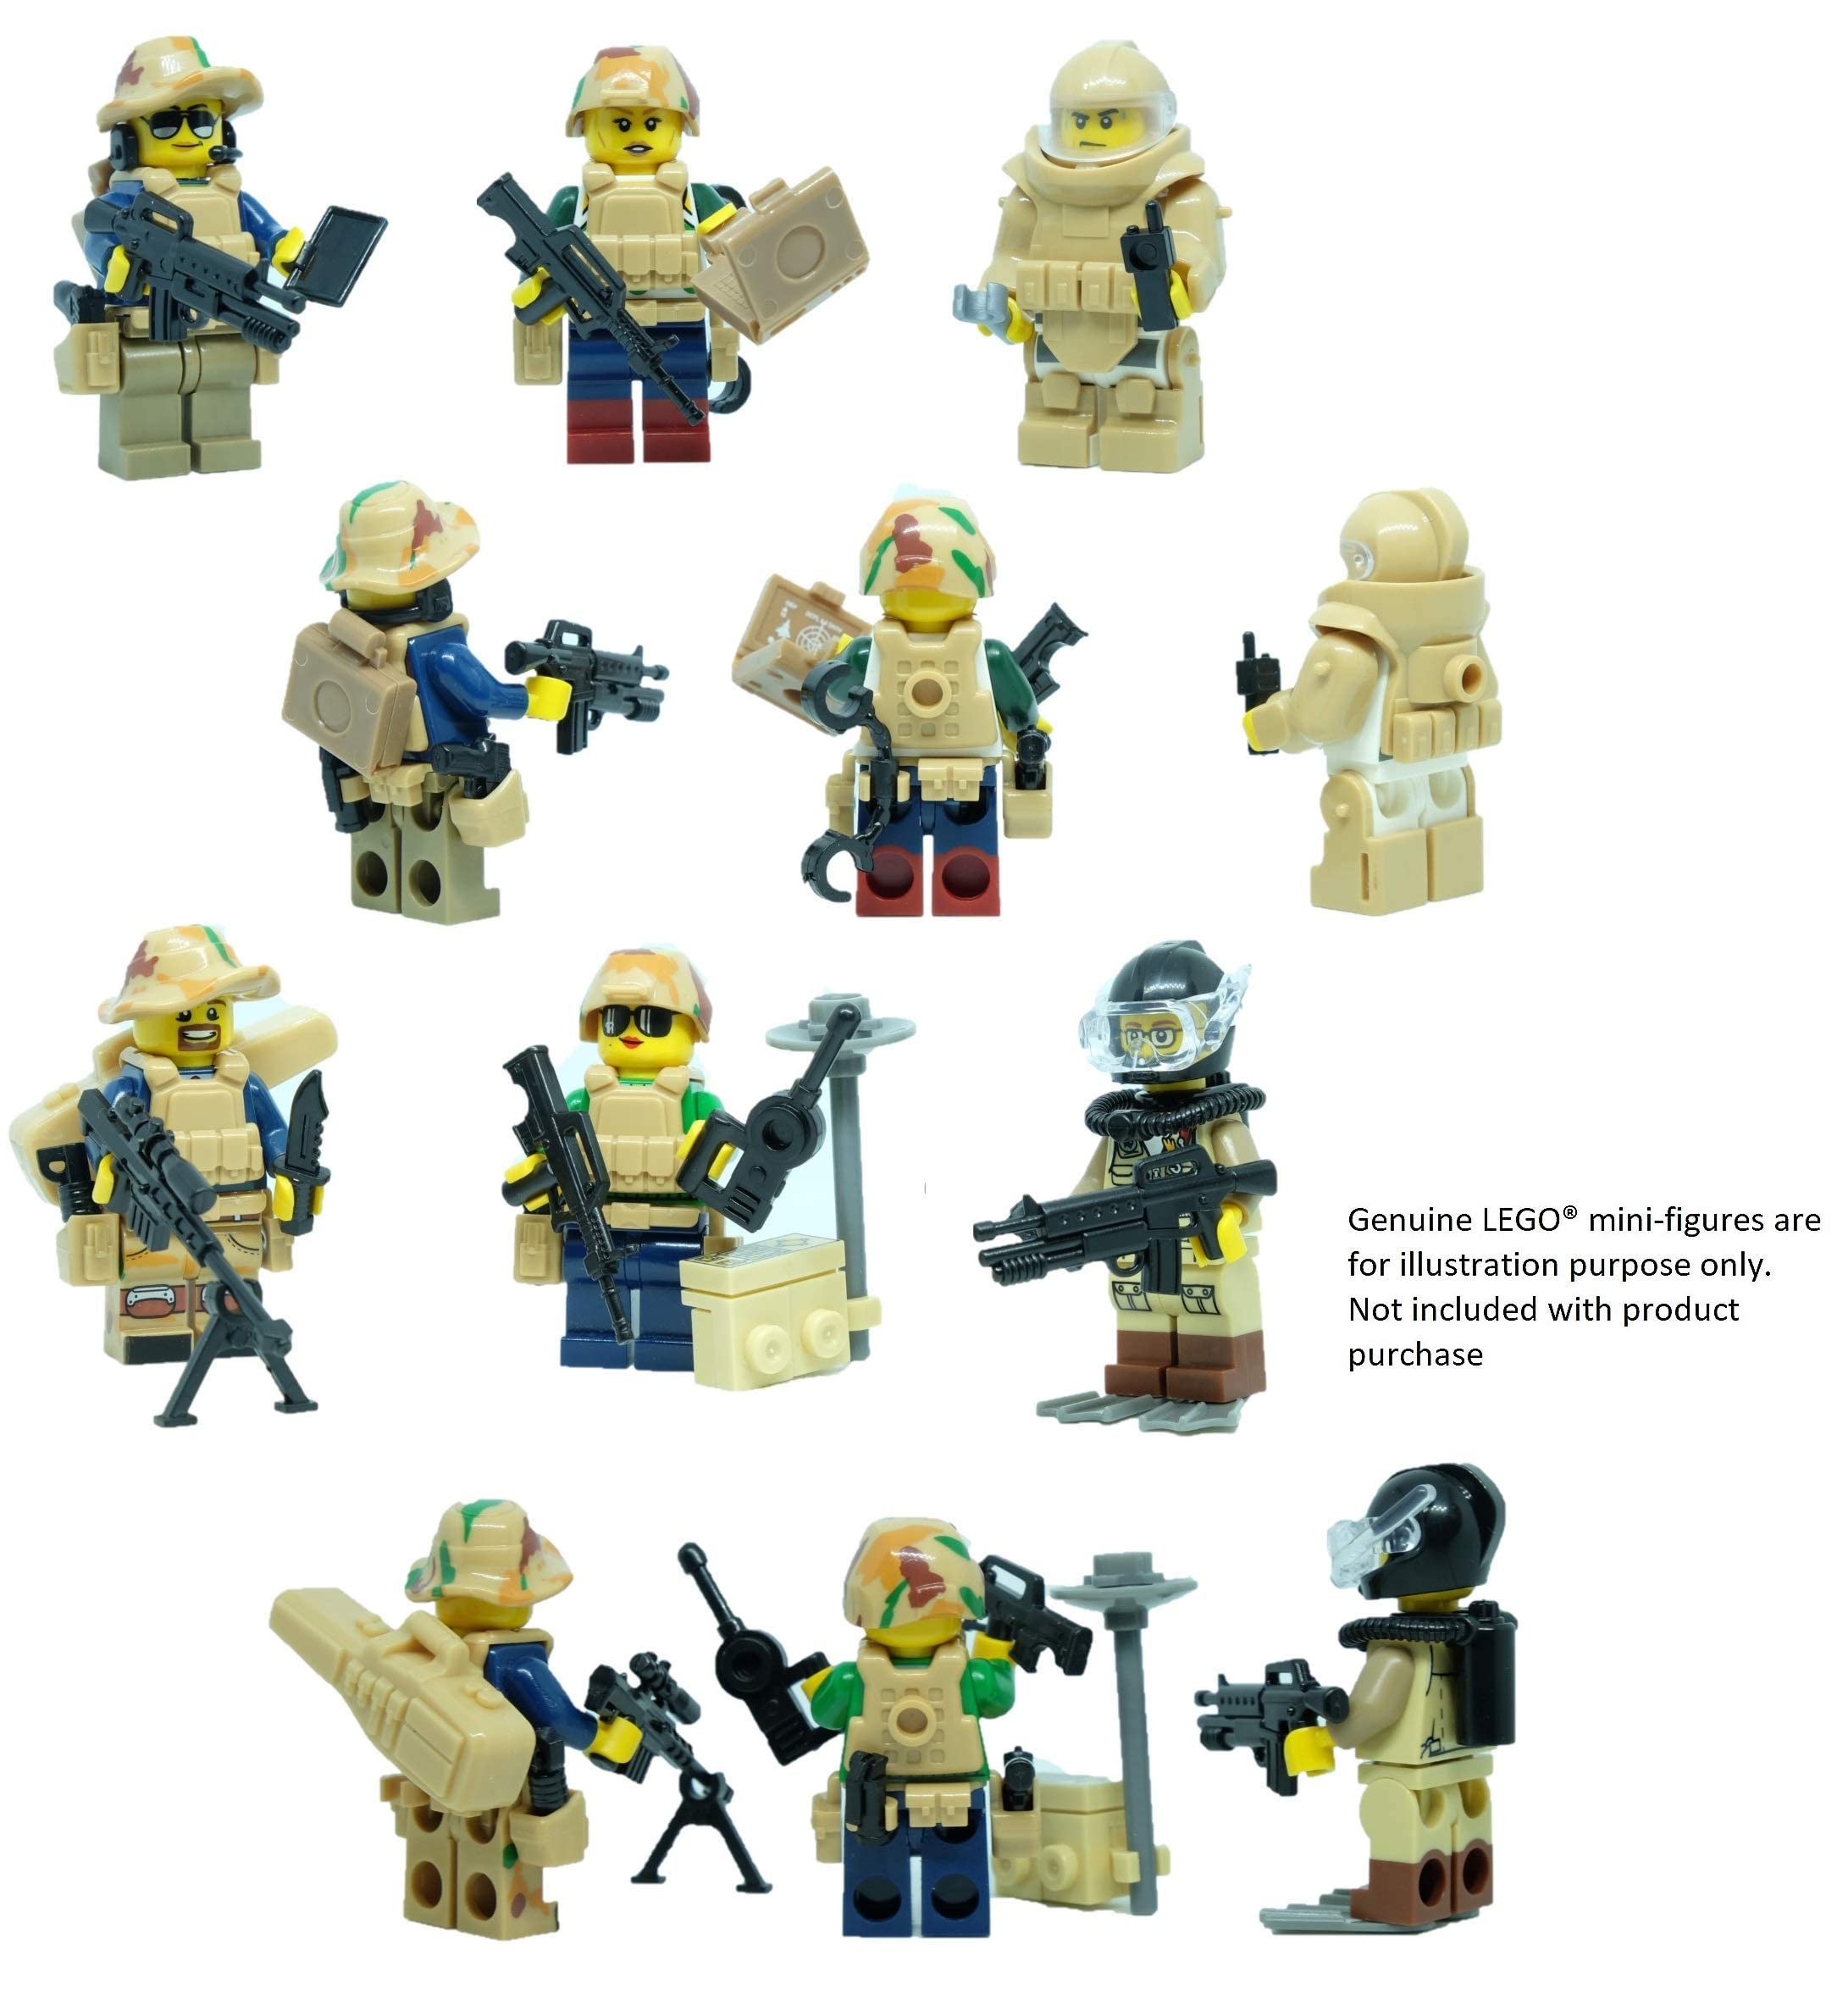 QPZ Minifigures Armor and Weapons Accessories Pack 12 Distinct Outfits Compatible with Army Soldier Minifigures from Leading Brand